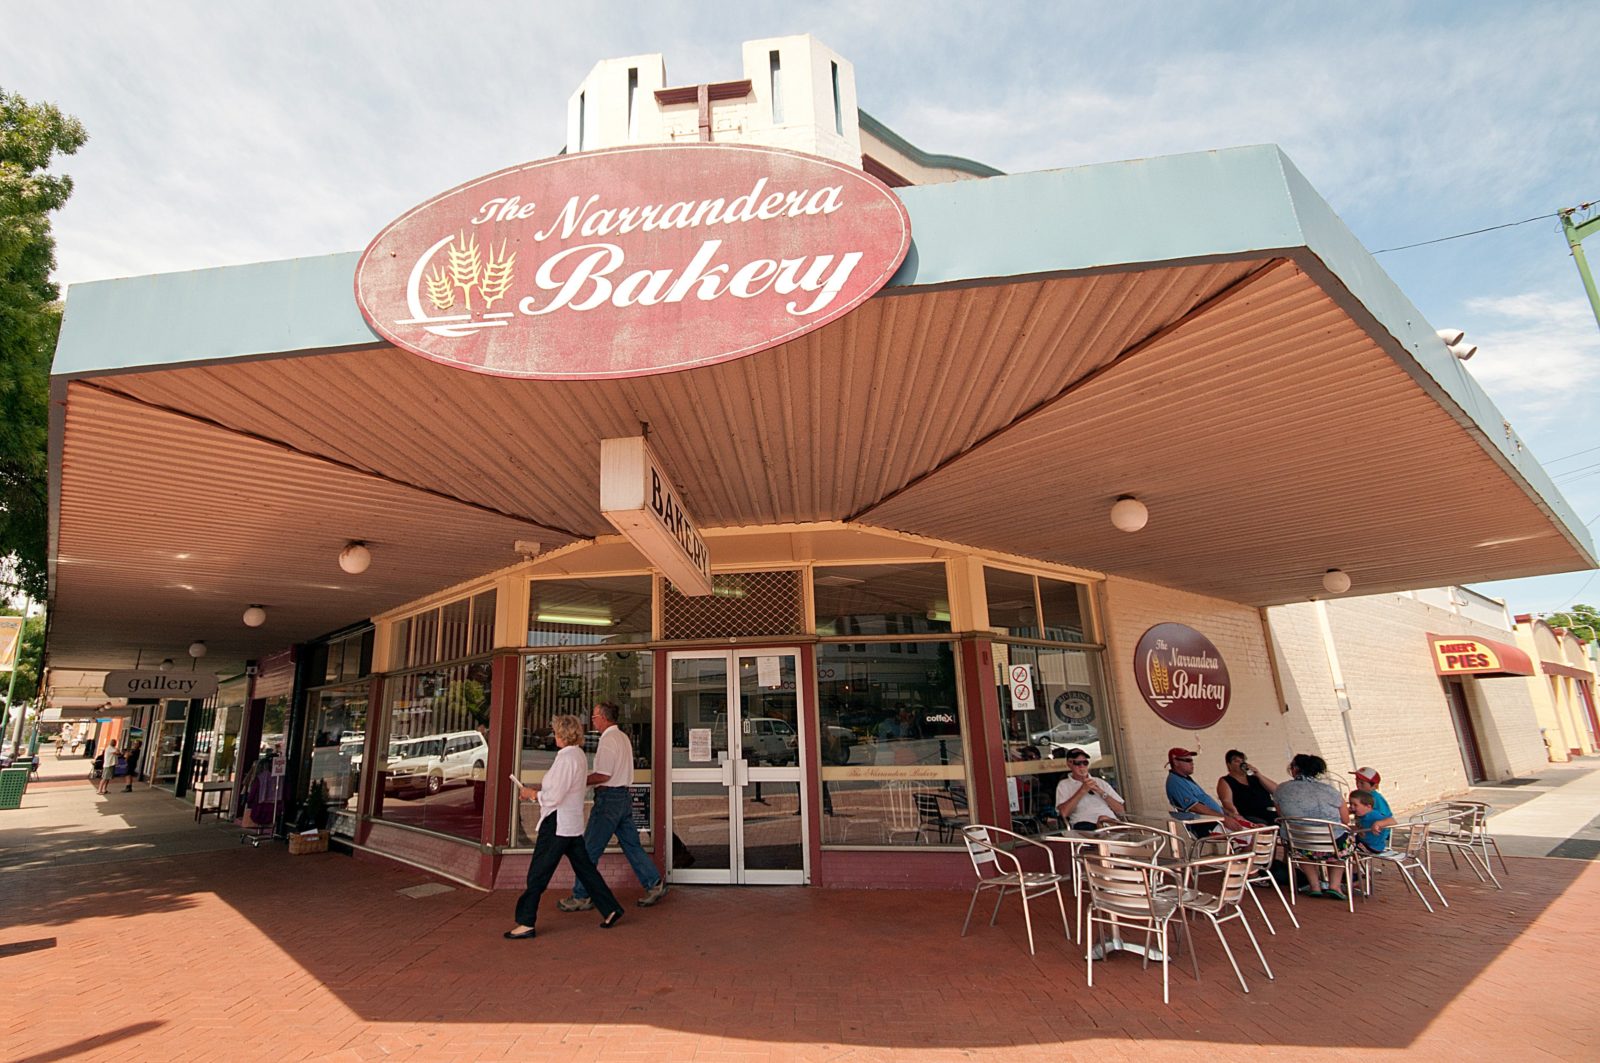 Outside view of Narrandera Bakery with customers enjoying a meal